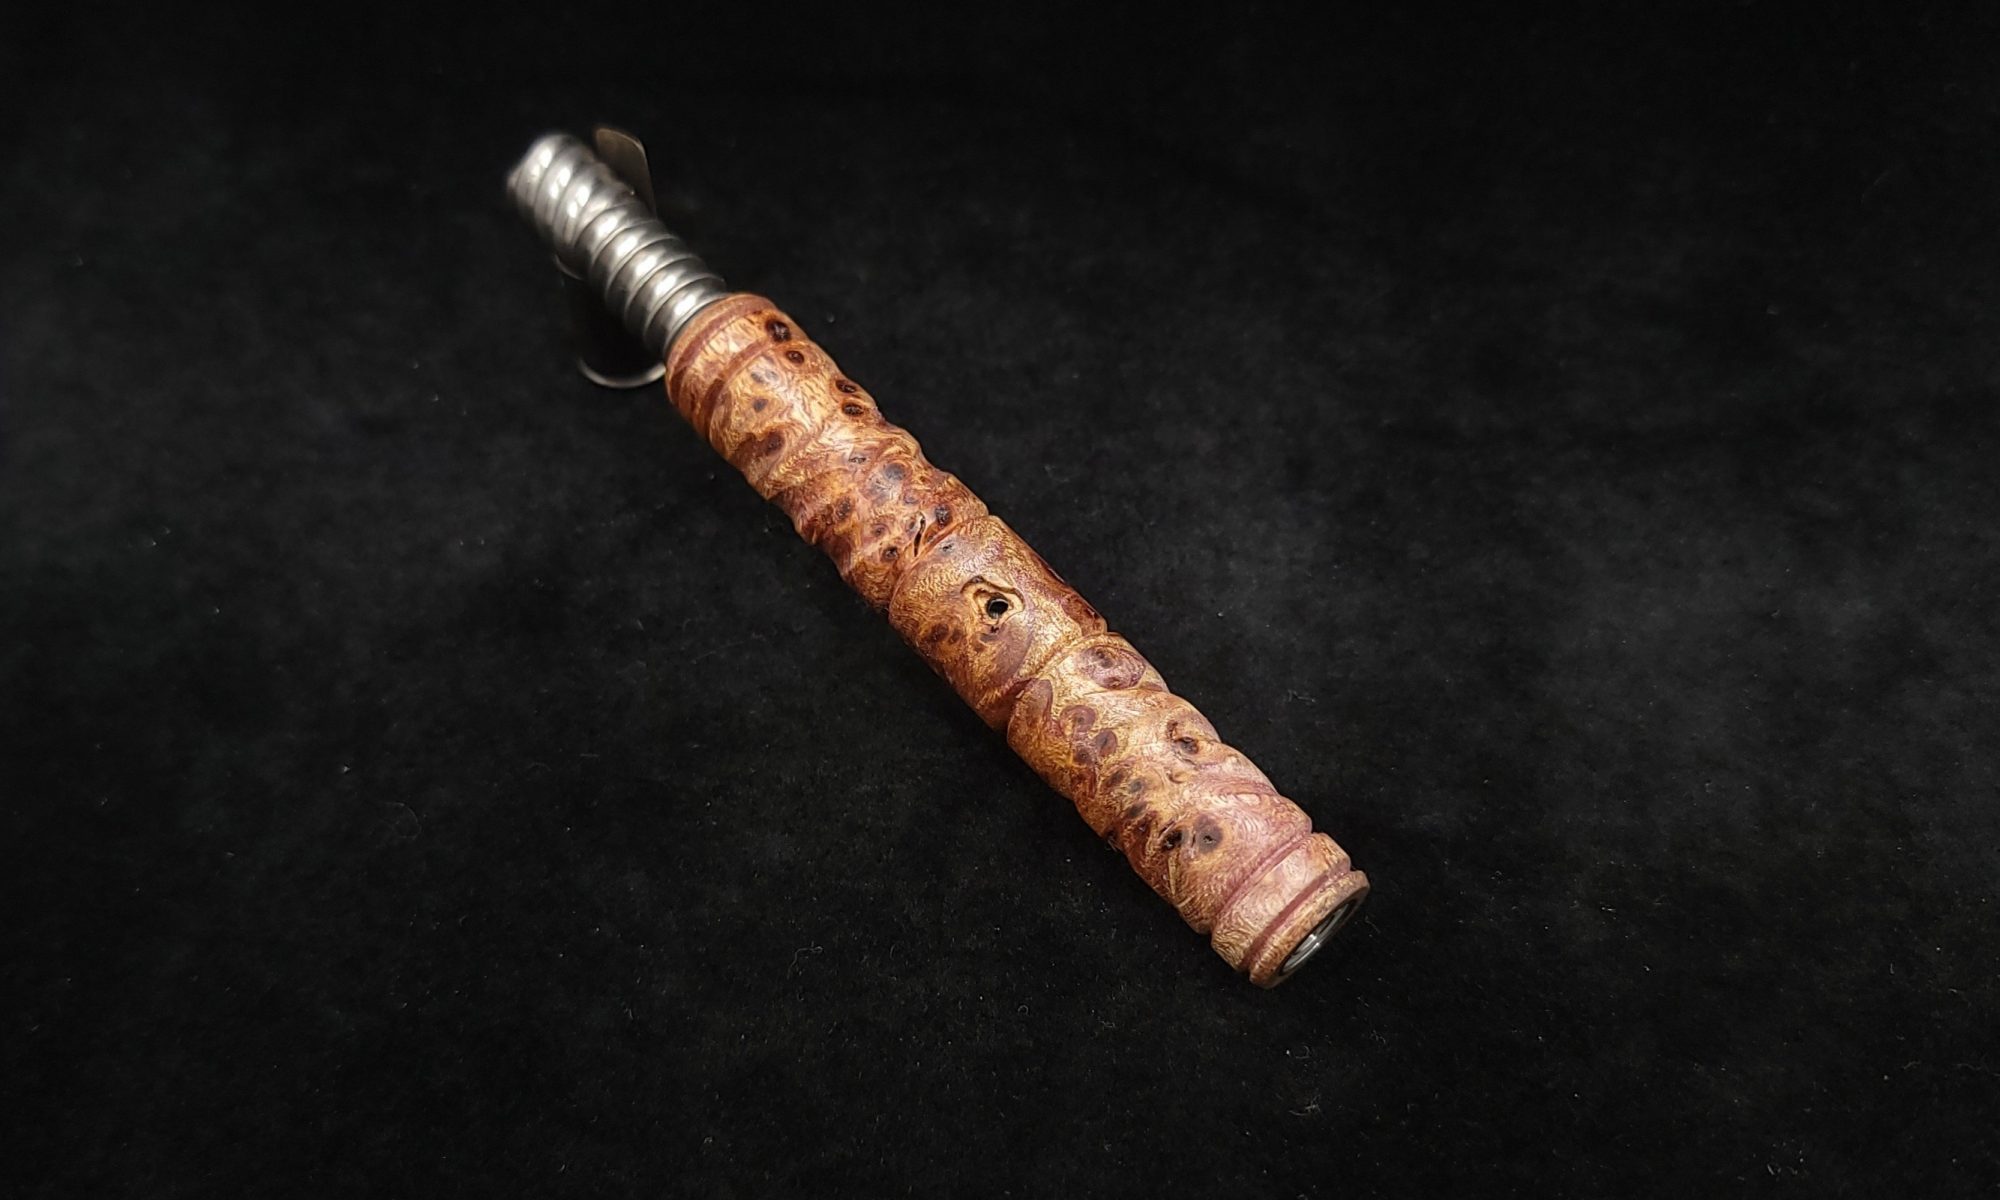 This image portrays Twisted Stems Series-Eclipse Slim Reversable XL Dynavap Stem by Dovetail Woodwork.